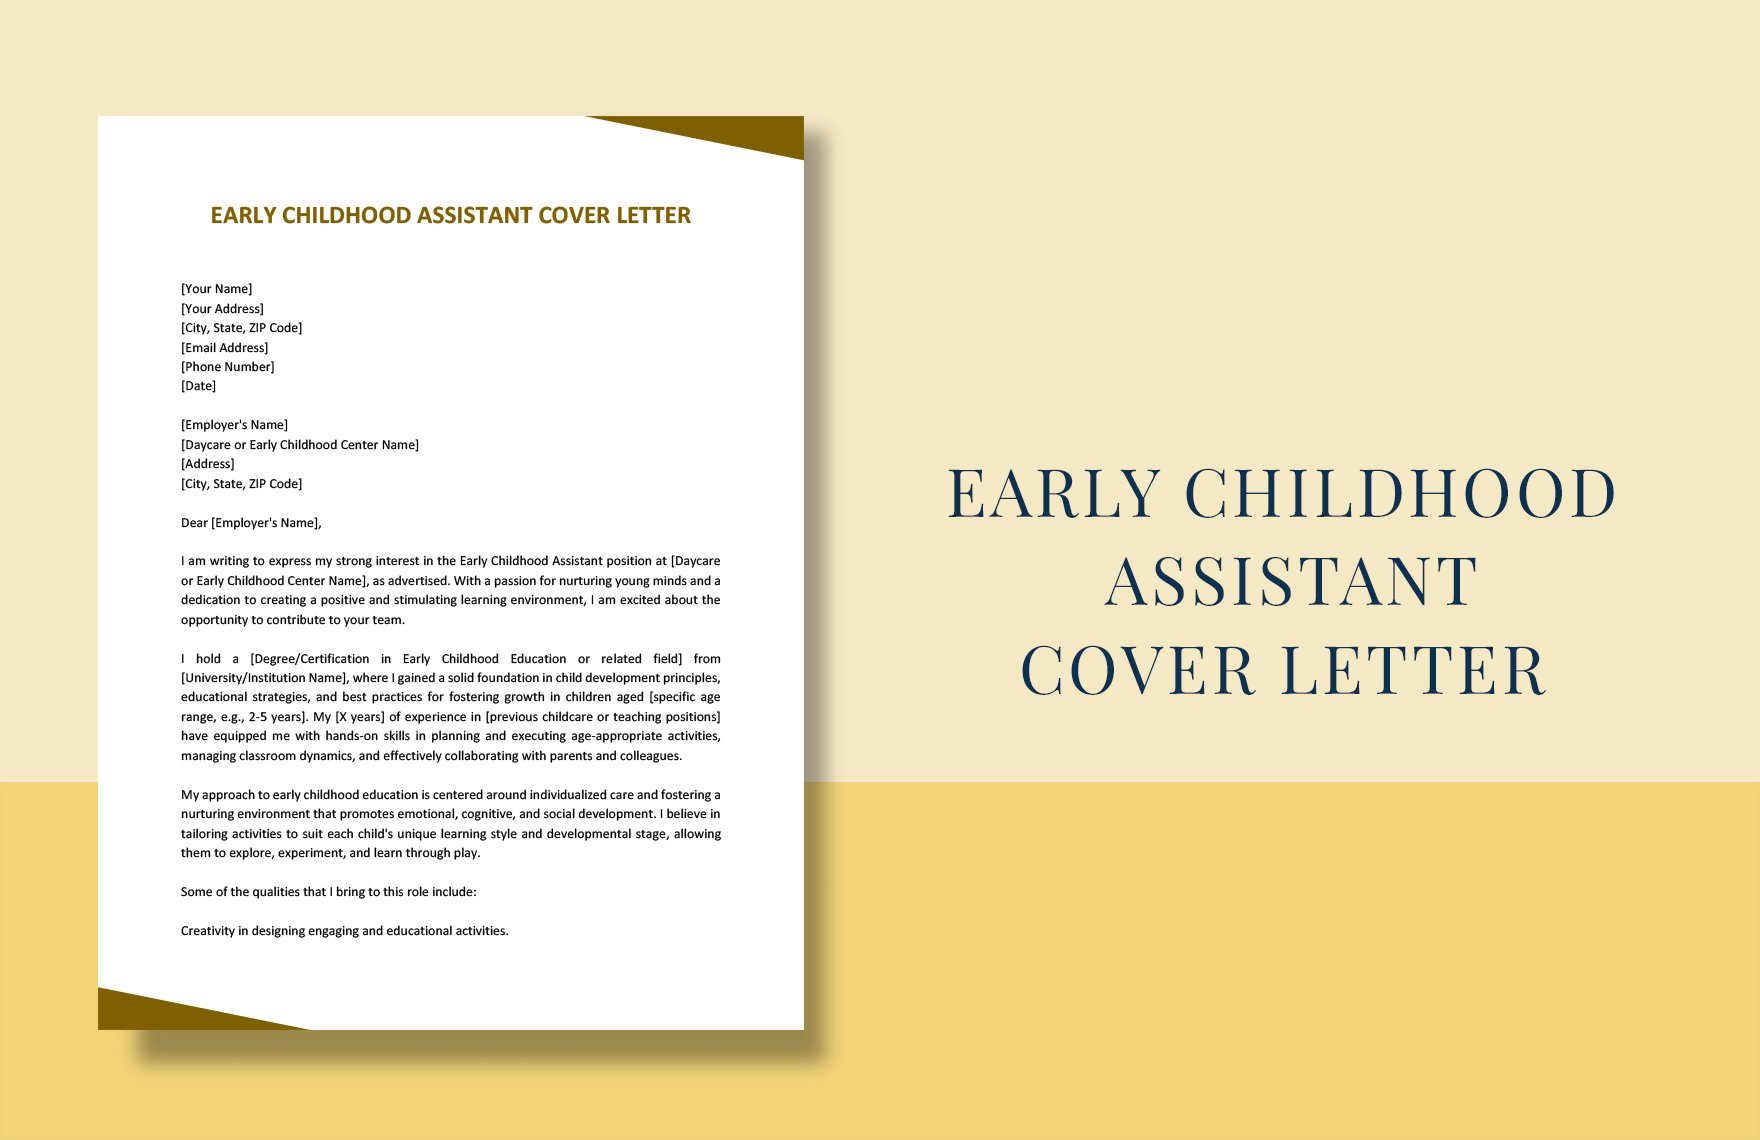 Early Childhood Assistant Cover Letter in Word, Google Docs, PDF